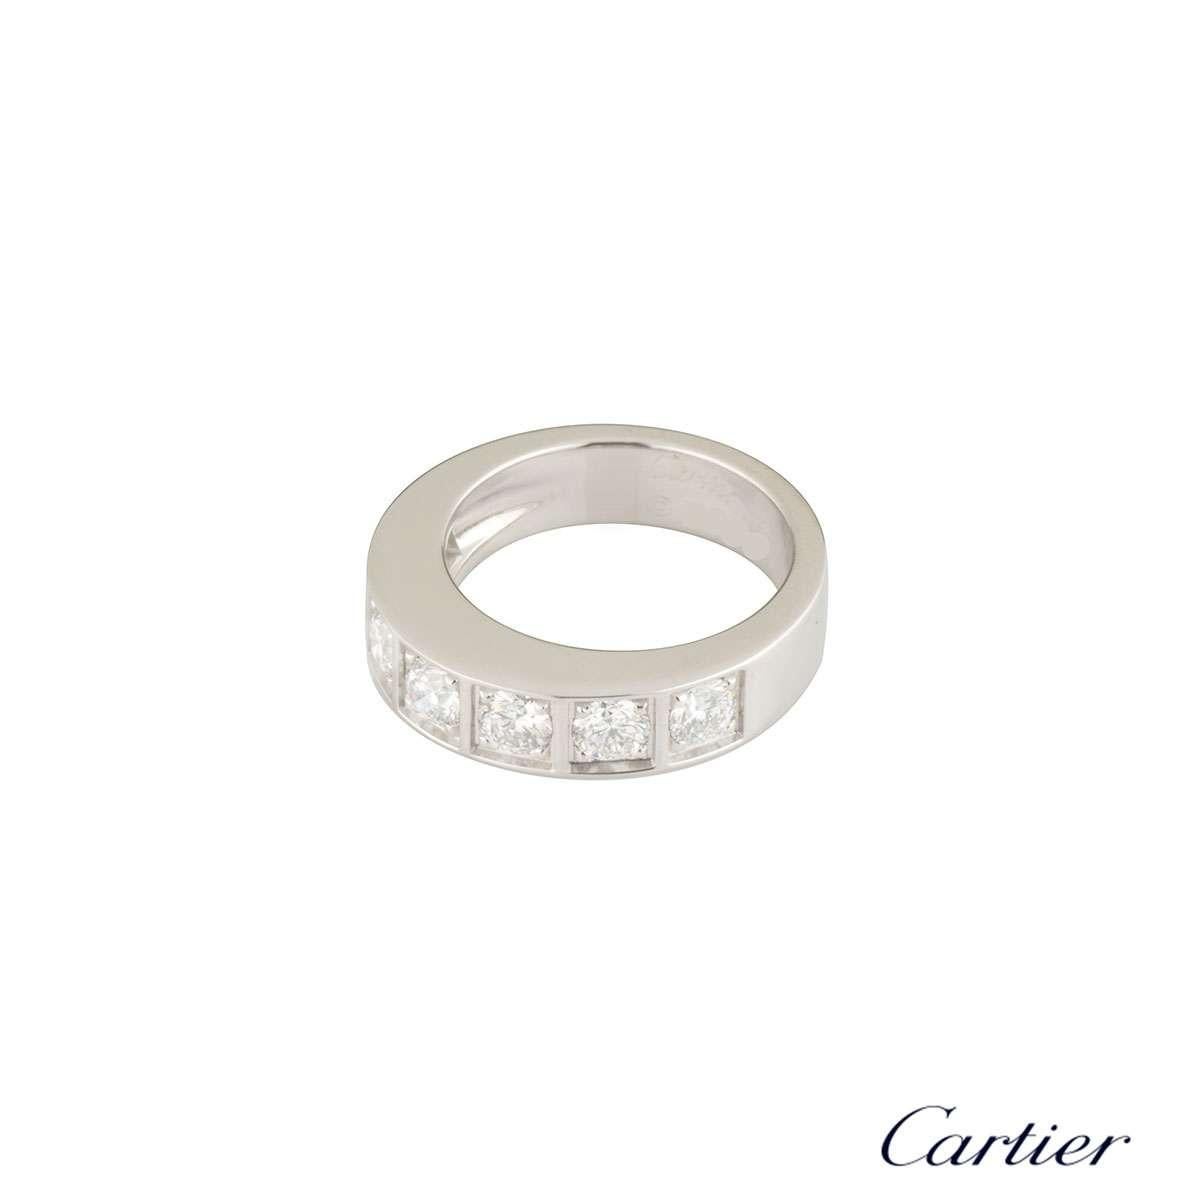 A beautiful 18k white gold half diamond set eternity ring by Cartier. The ring is comprised of 7 round brilliant cut claw set diamonds, each in an individual square surround. The diamonds have a total carat weight of approximately 1.05ct, and are